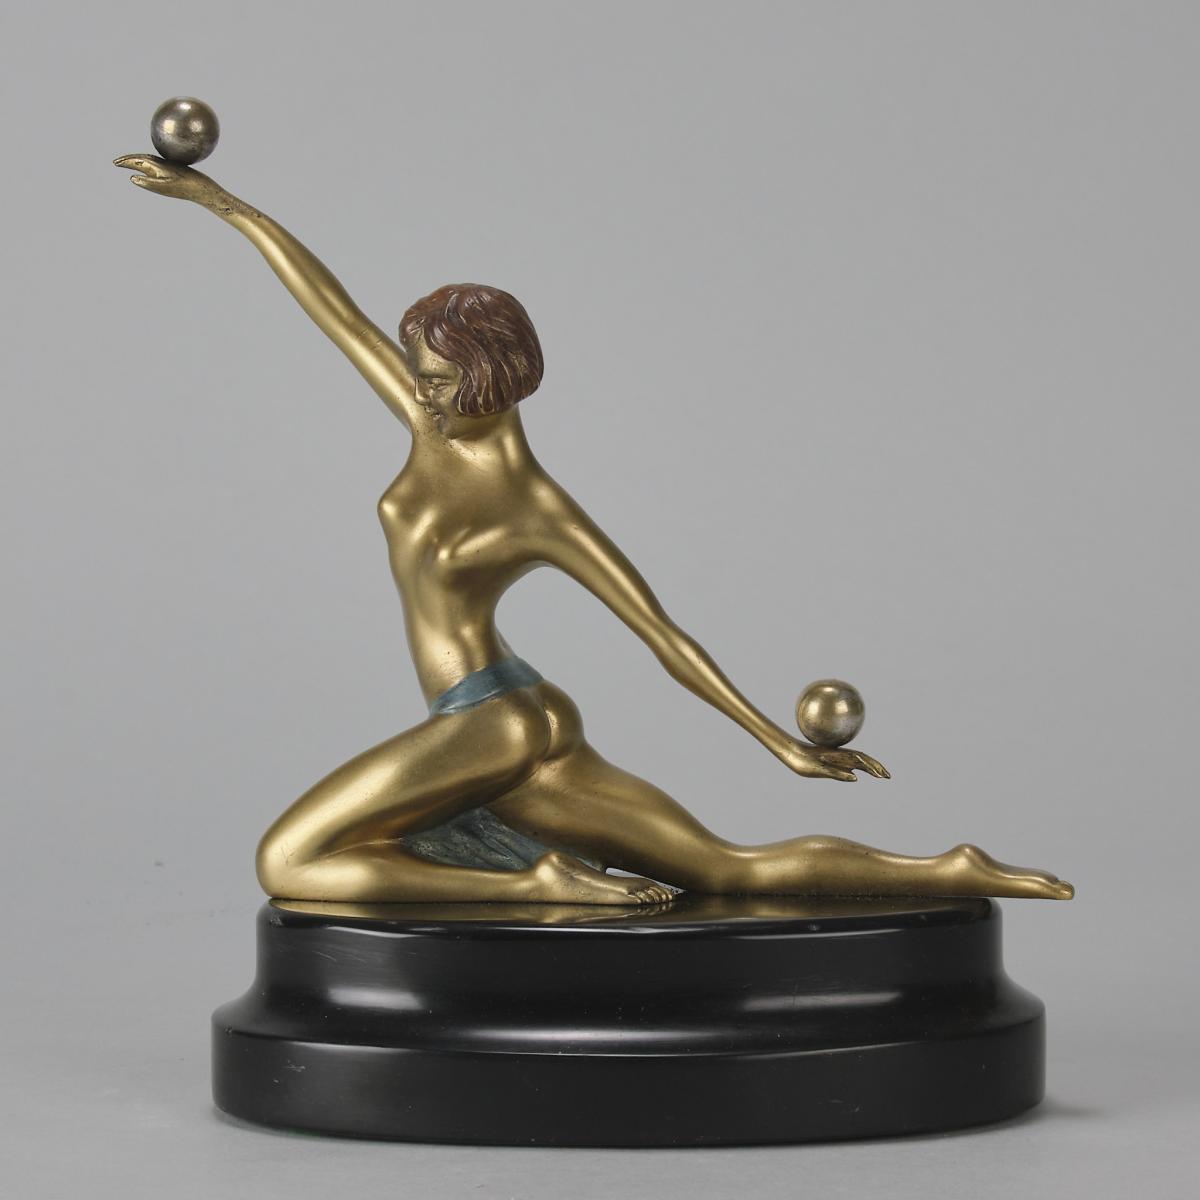 Early 20th Century Cold-Painted Art Deco Sculpture entitled "Deco Dancer"